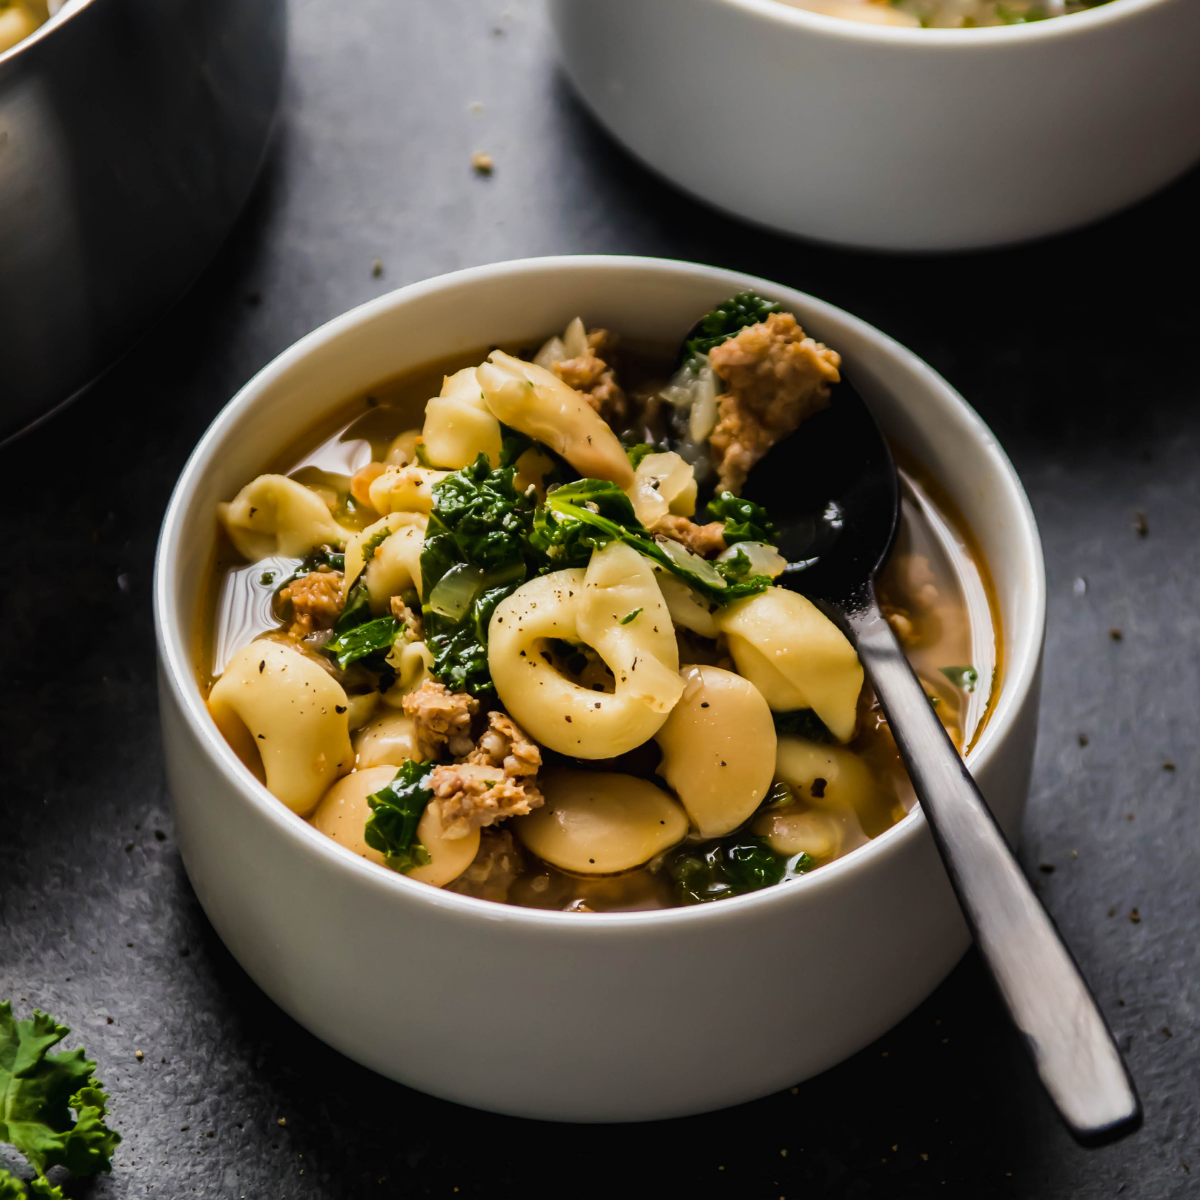 Tortellini soup with sausage and kale in a white bowl.